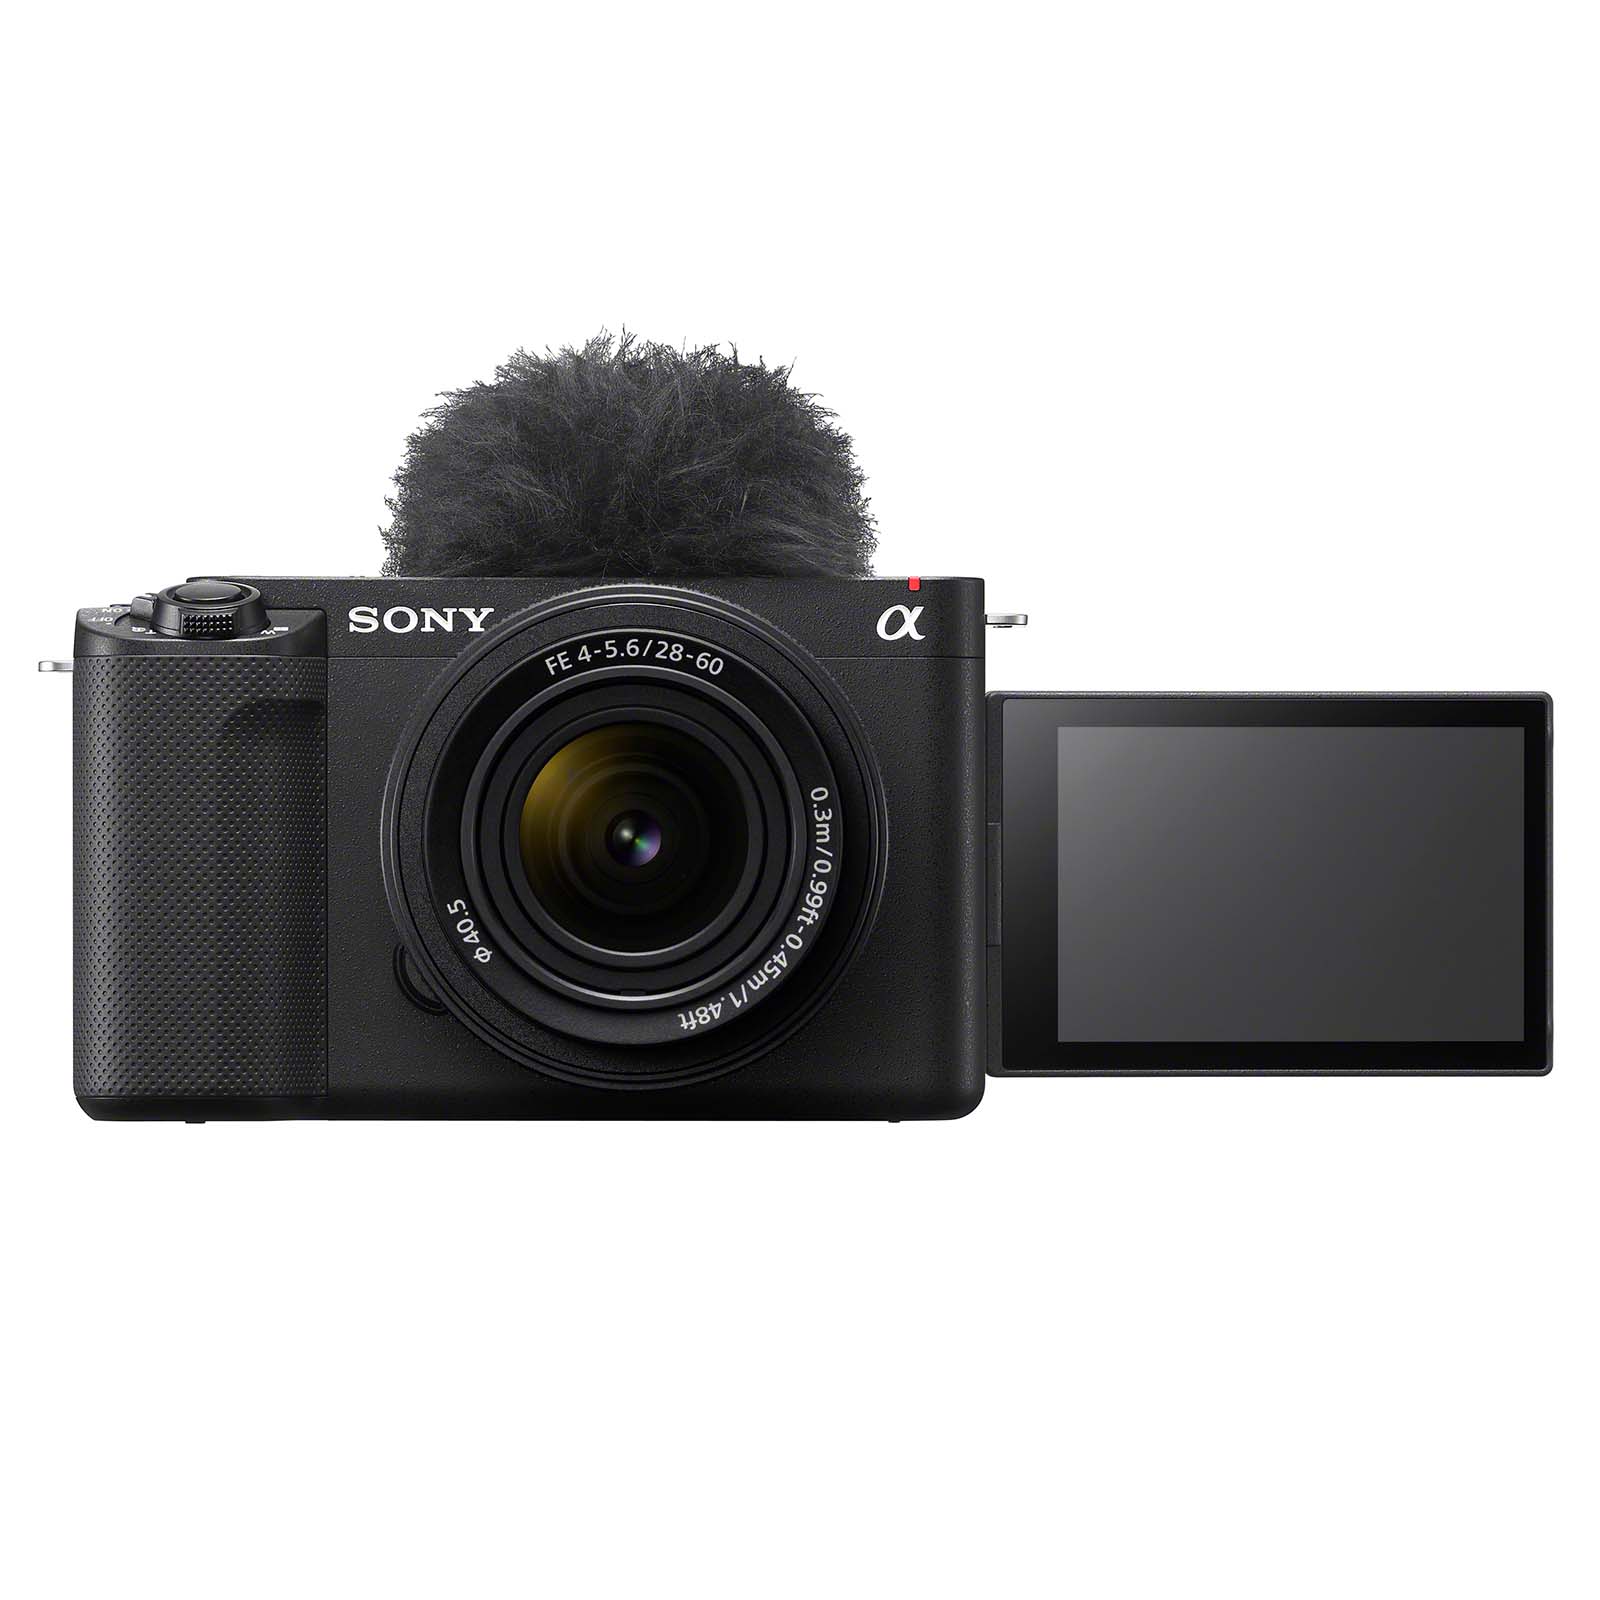 Image of Sony ZVE1 Digital Camera with 2860mm Lens